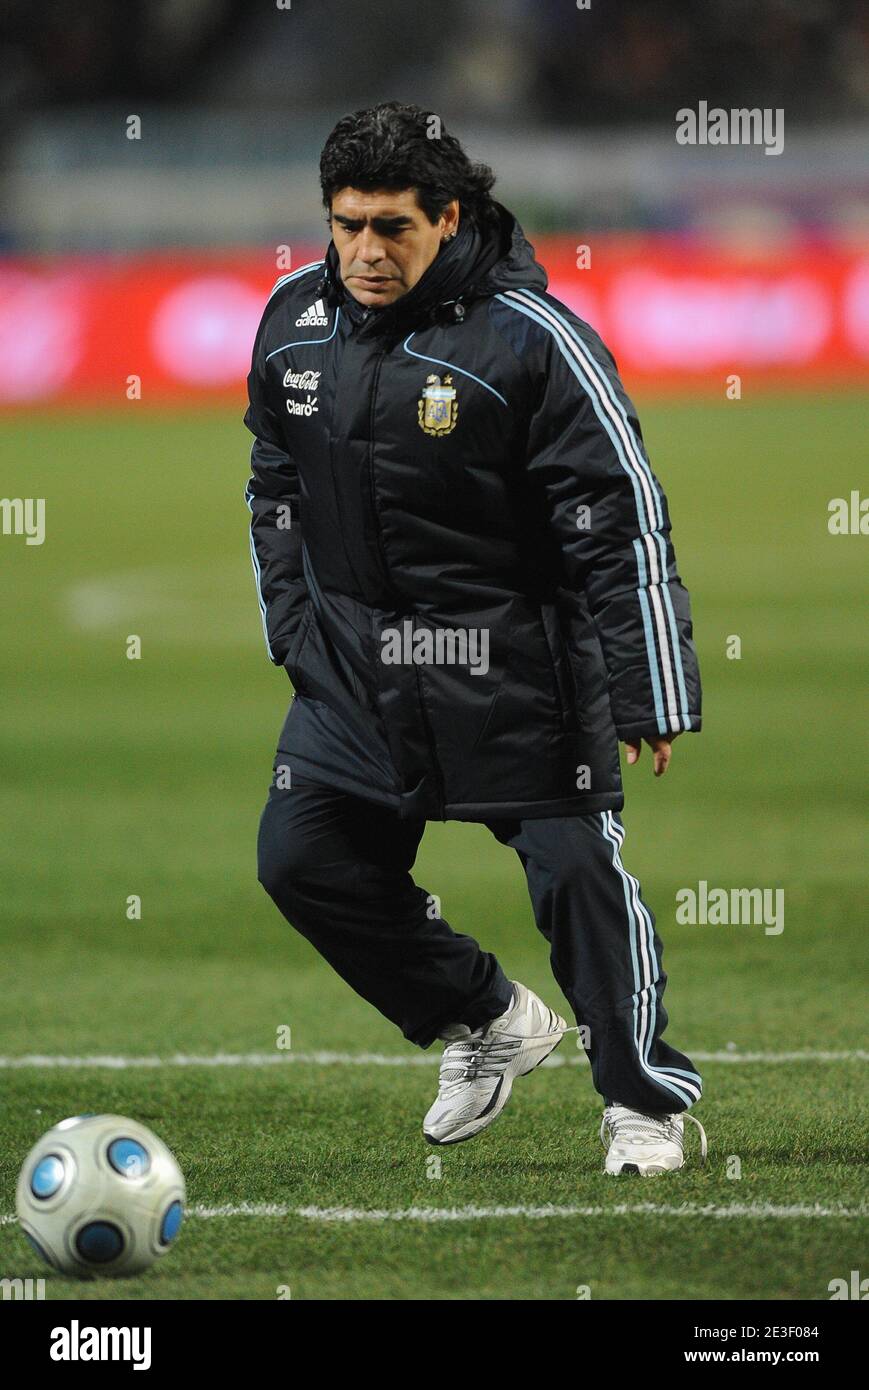 Argentinian national football team coach Diego Maradona during the  International Friendly Soccer match, France vs Argentina at the velodrome  Stadium in Marseille, France on February 11, 2009. Argentina won 2-0. Photo  by